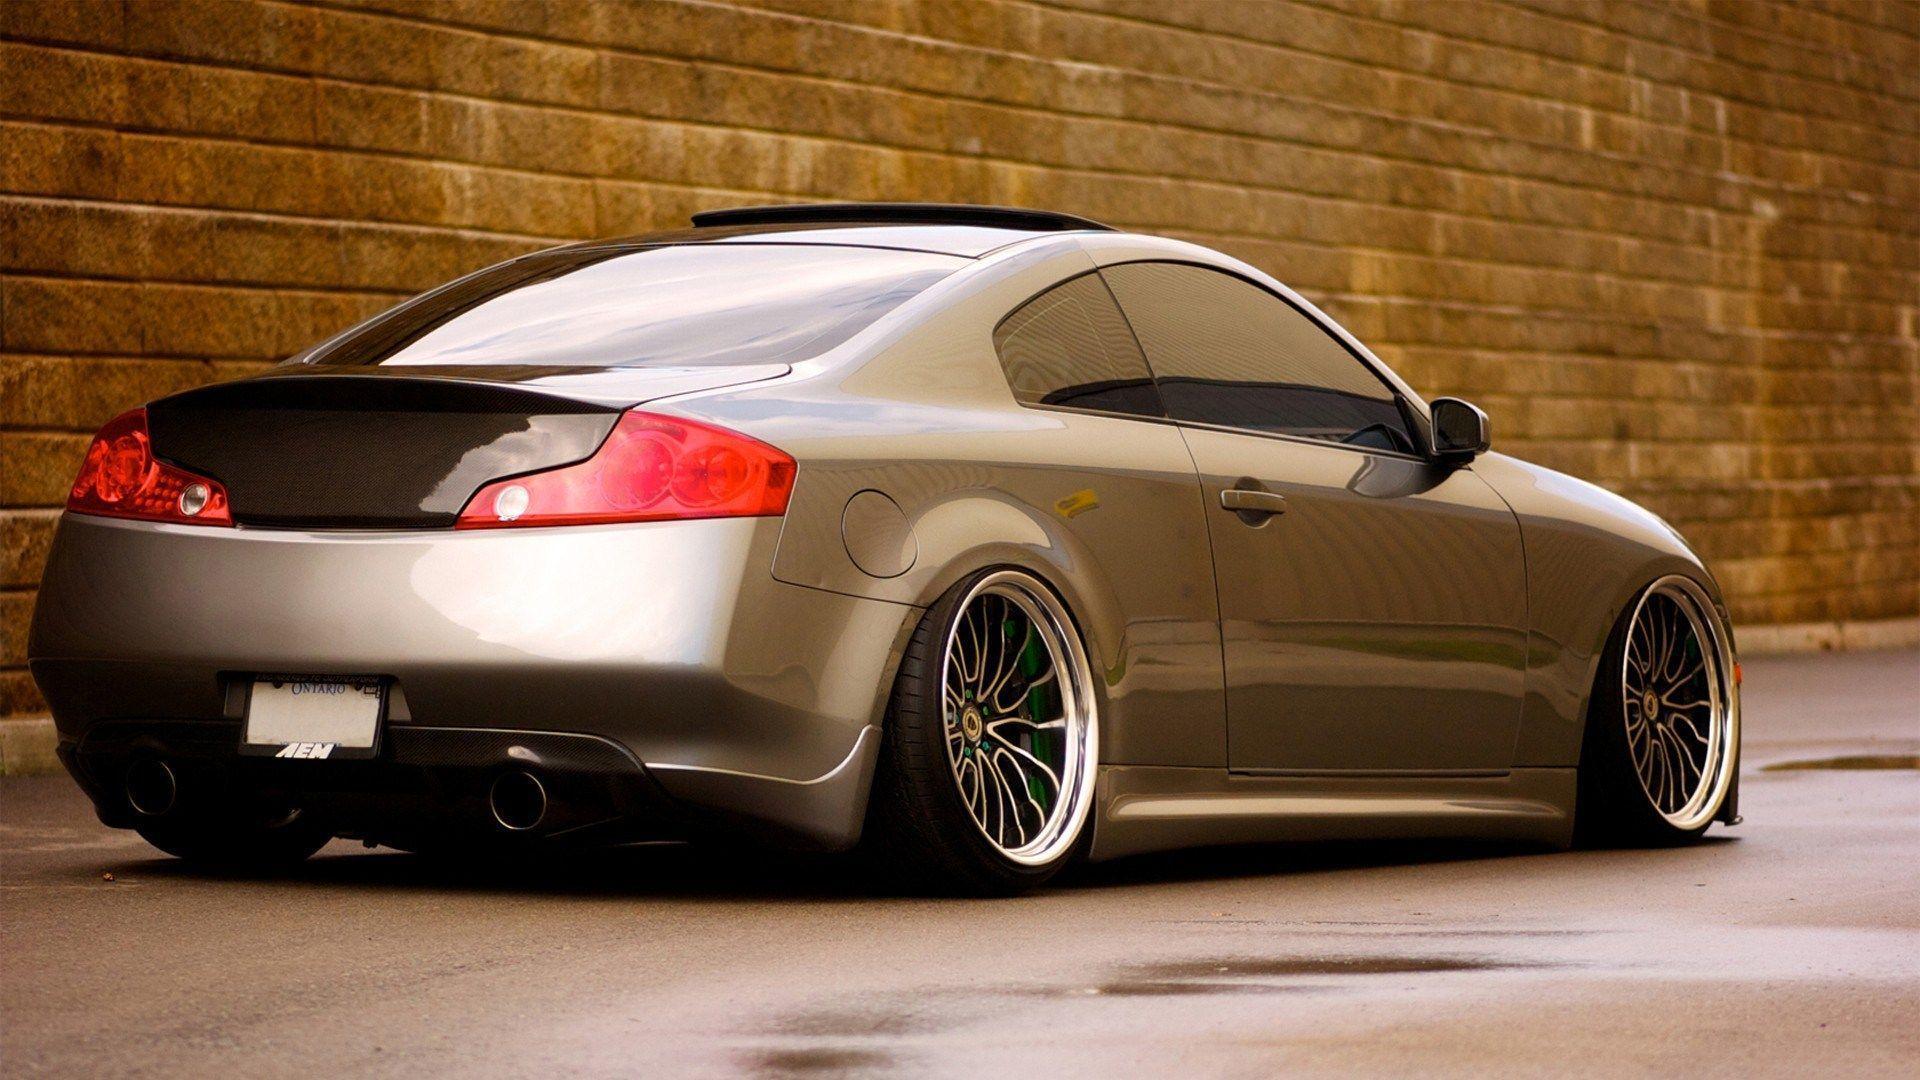 g35 infiniti tuning parked next to brick wall wide HD wallpaper